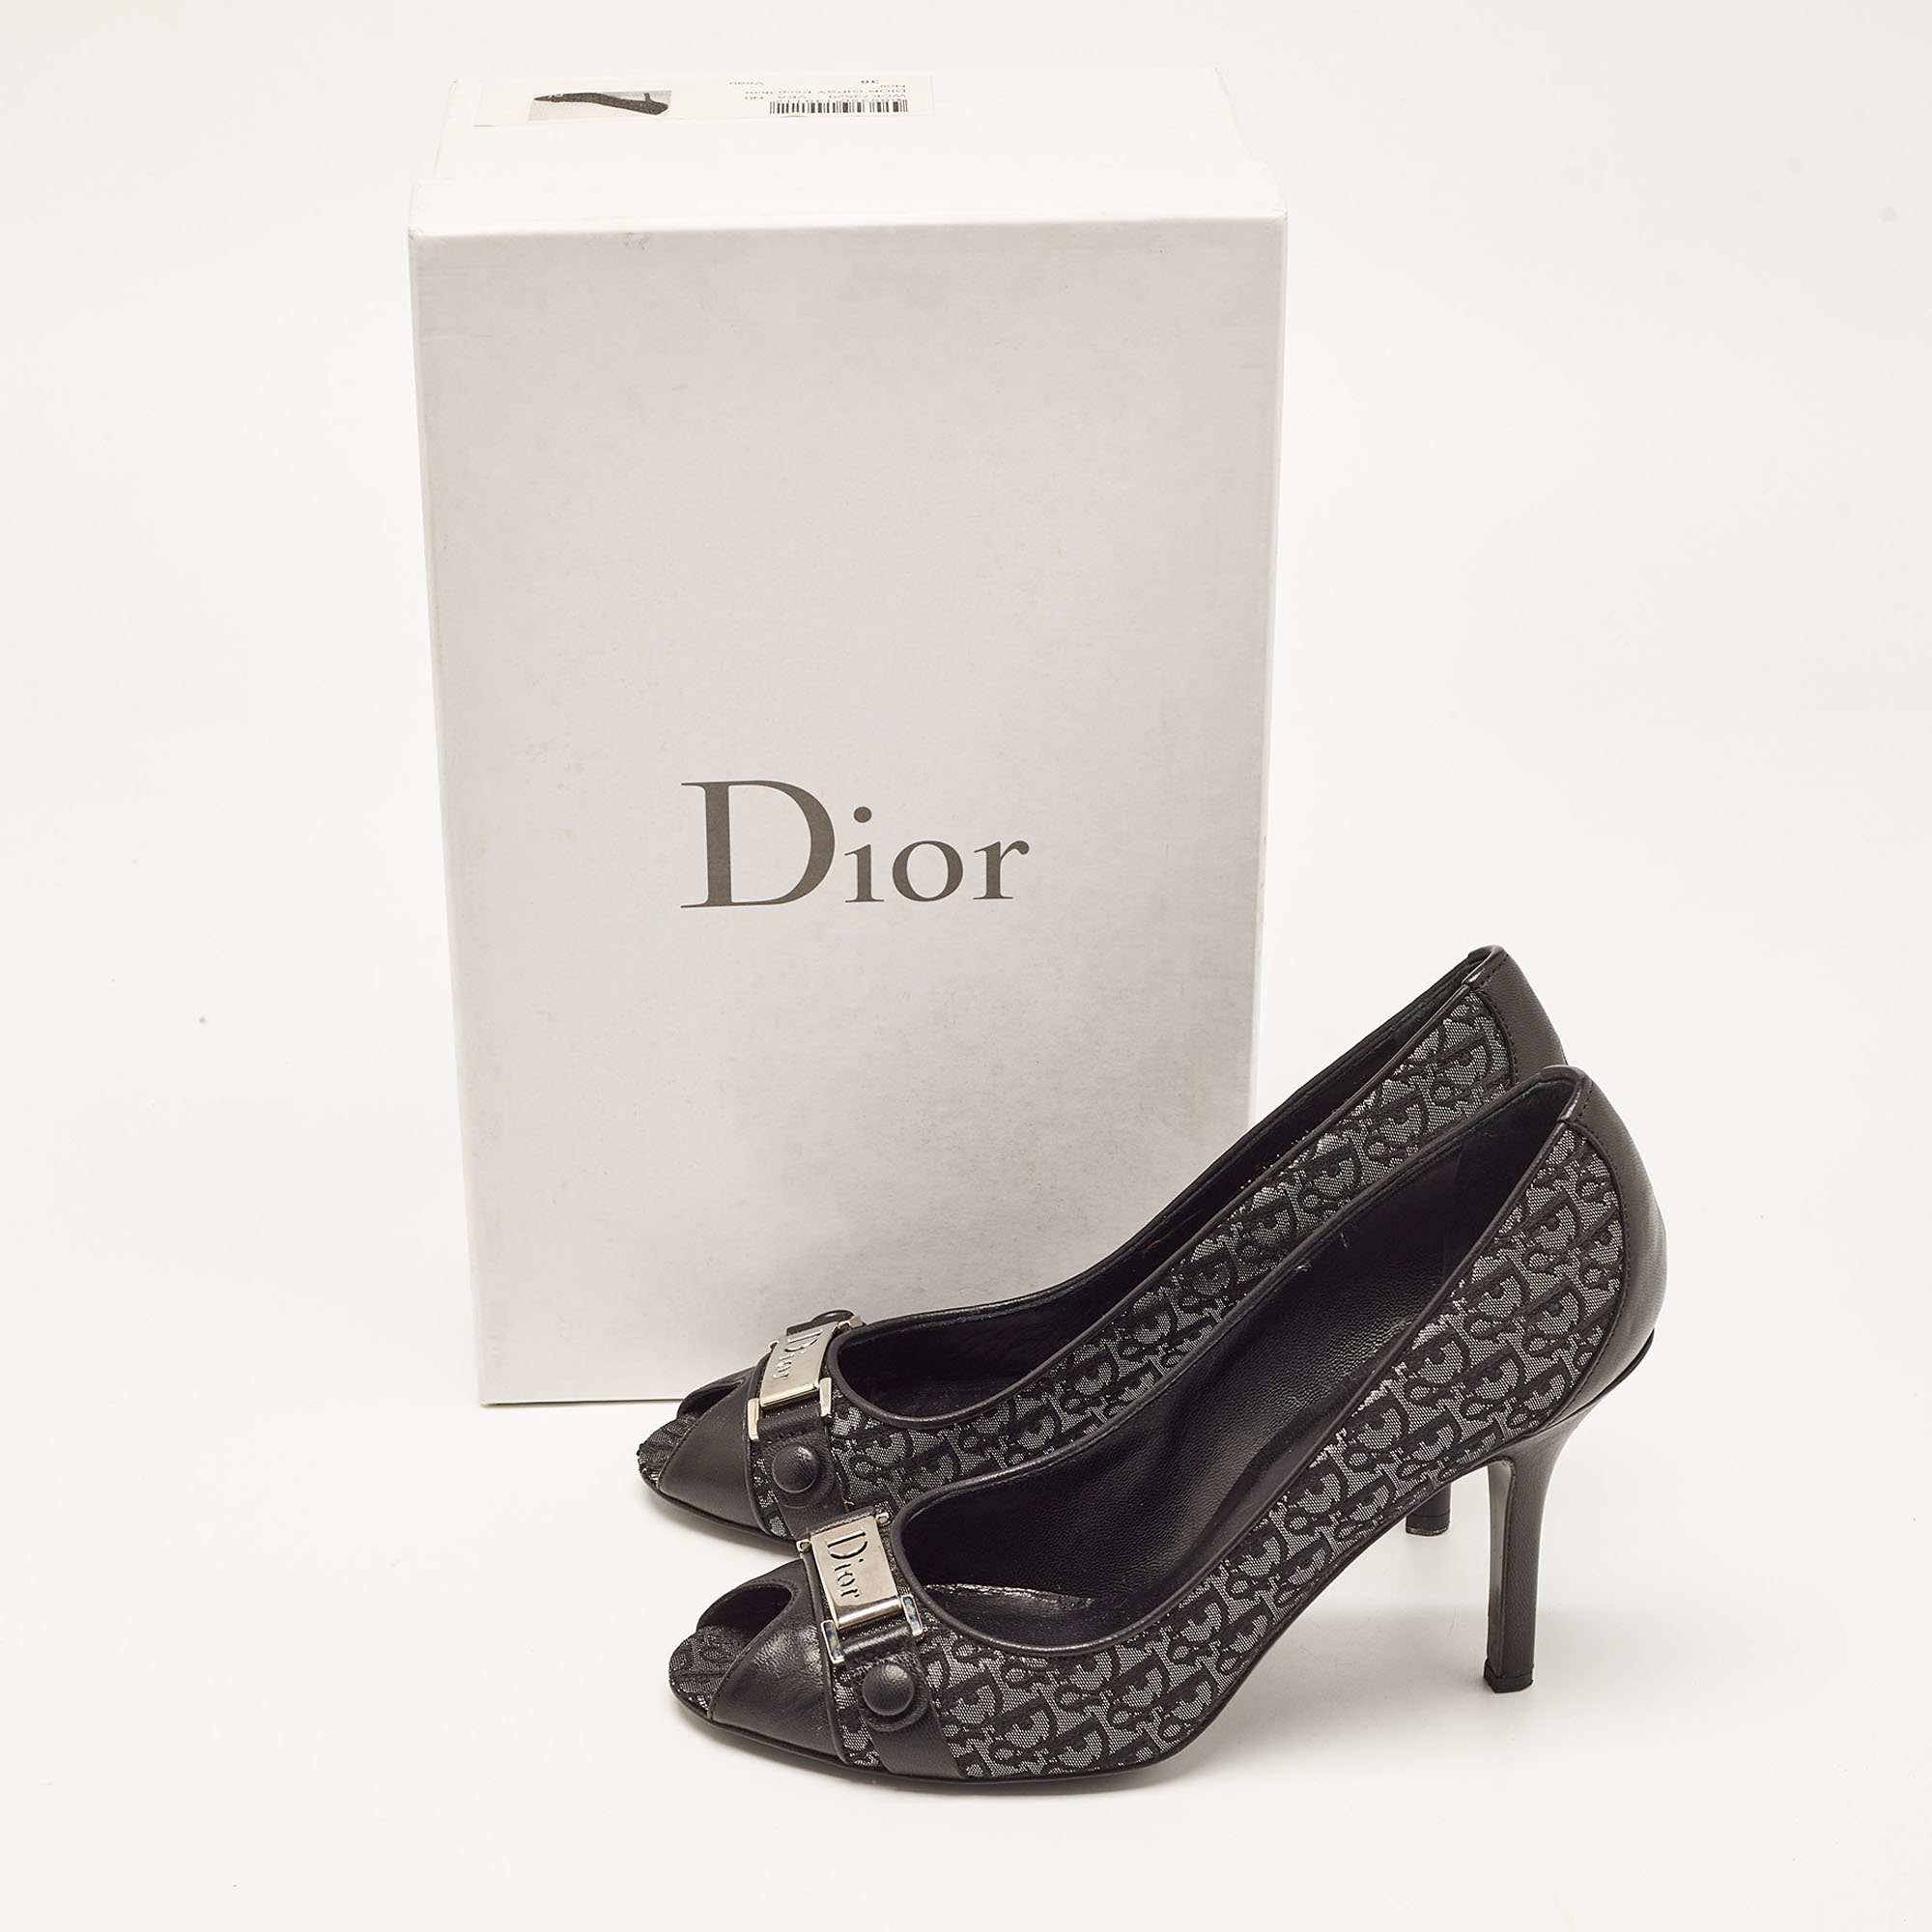 Dior Black/Grey Leather And Canvas Peep Toe Pumps Size 36.5